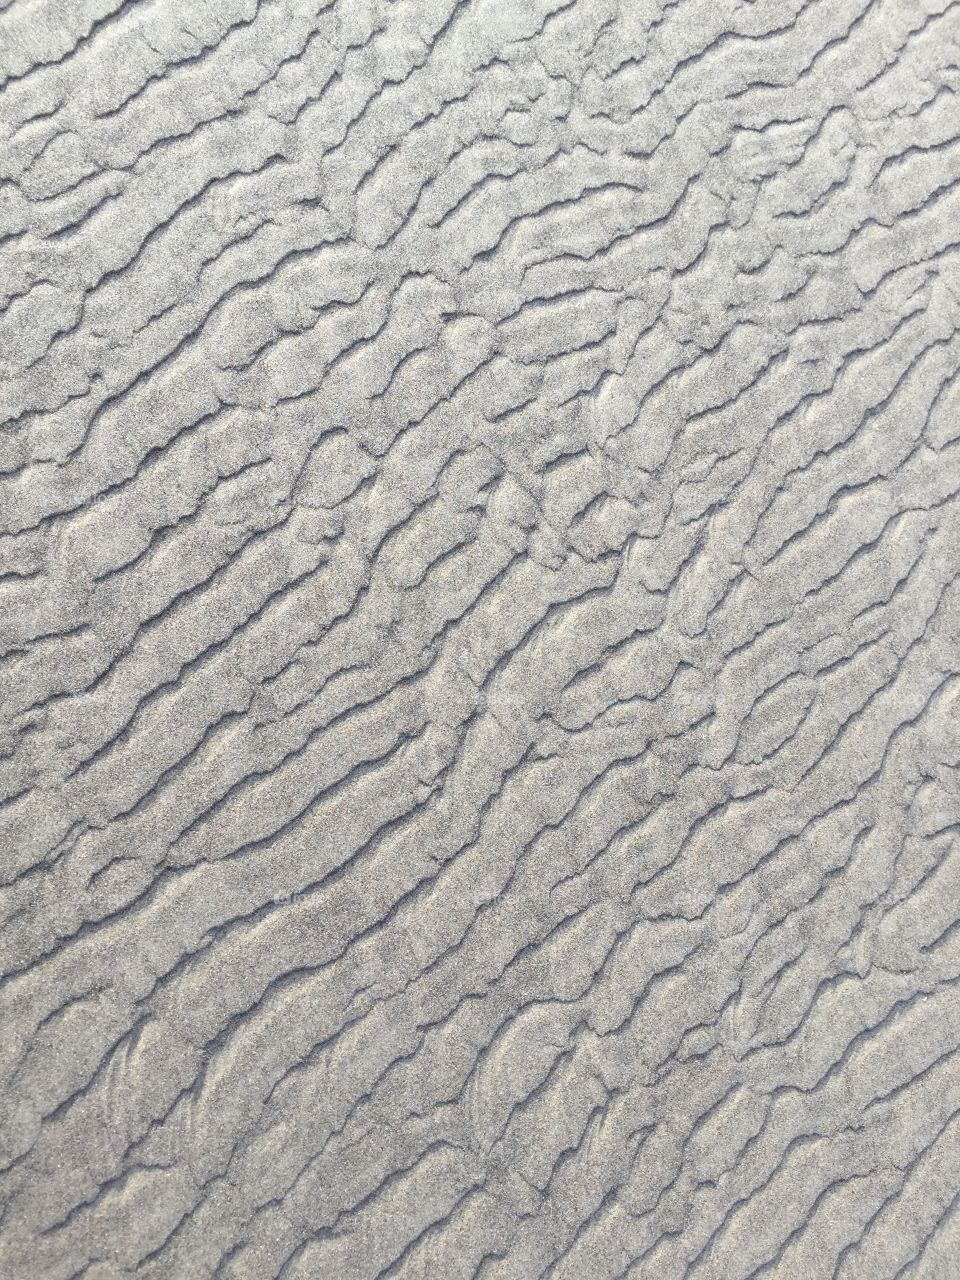 Sand texture, tide out